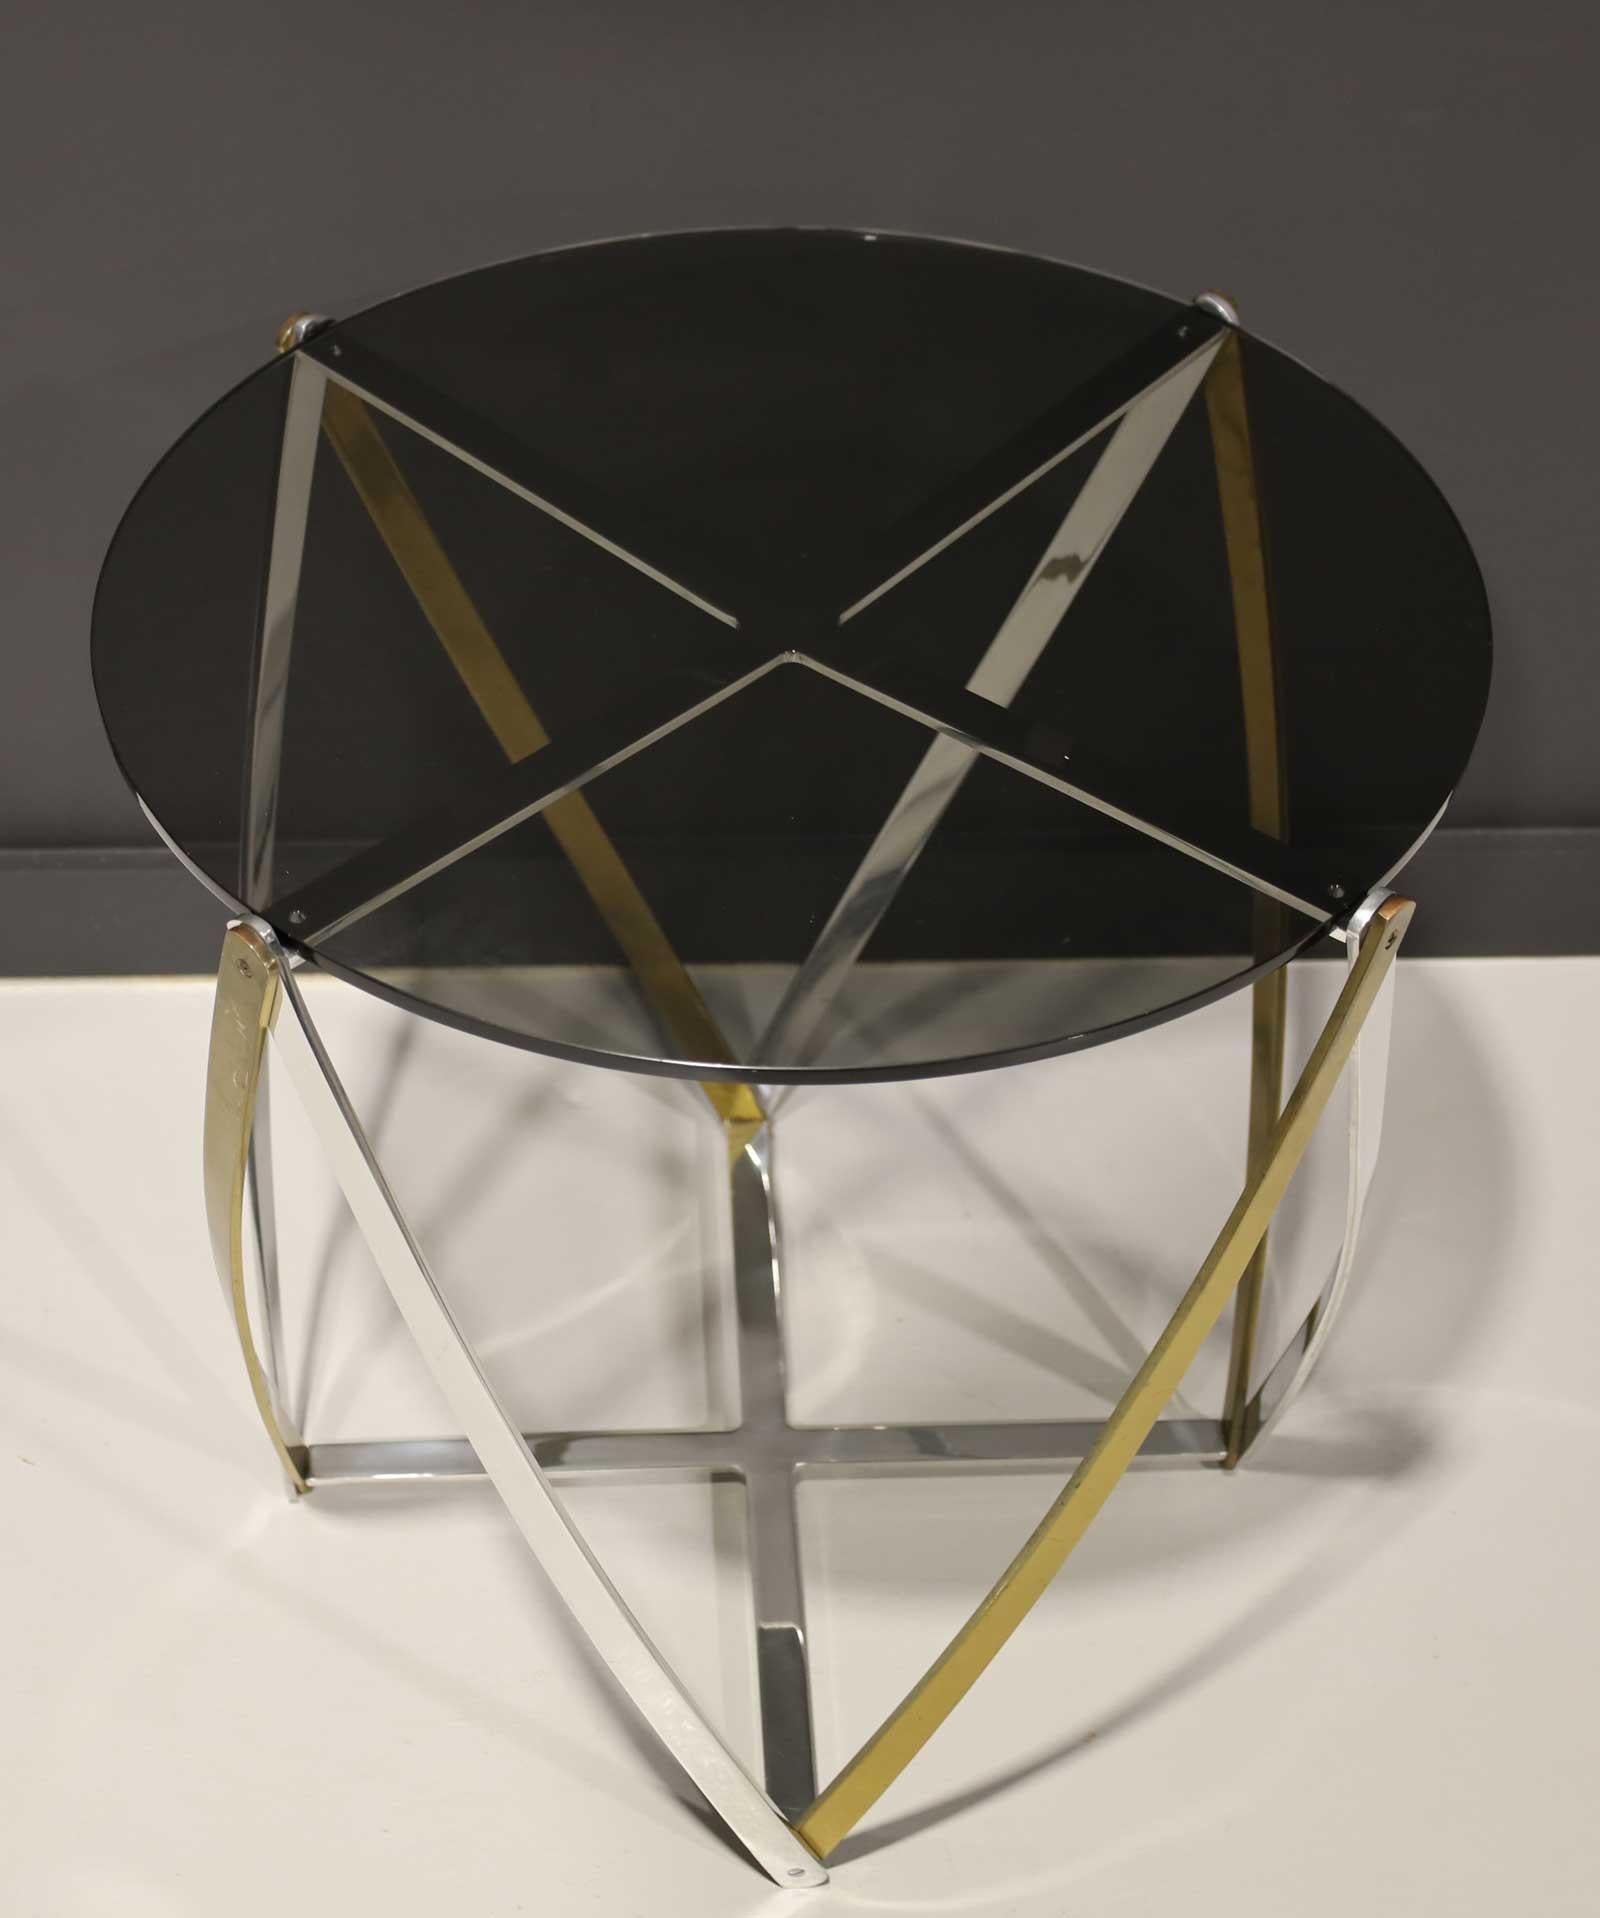 20th Century John Vesey Brass and Brushed Aluminum End Table 1970s, Smoked Glass Top For Sale